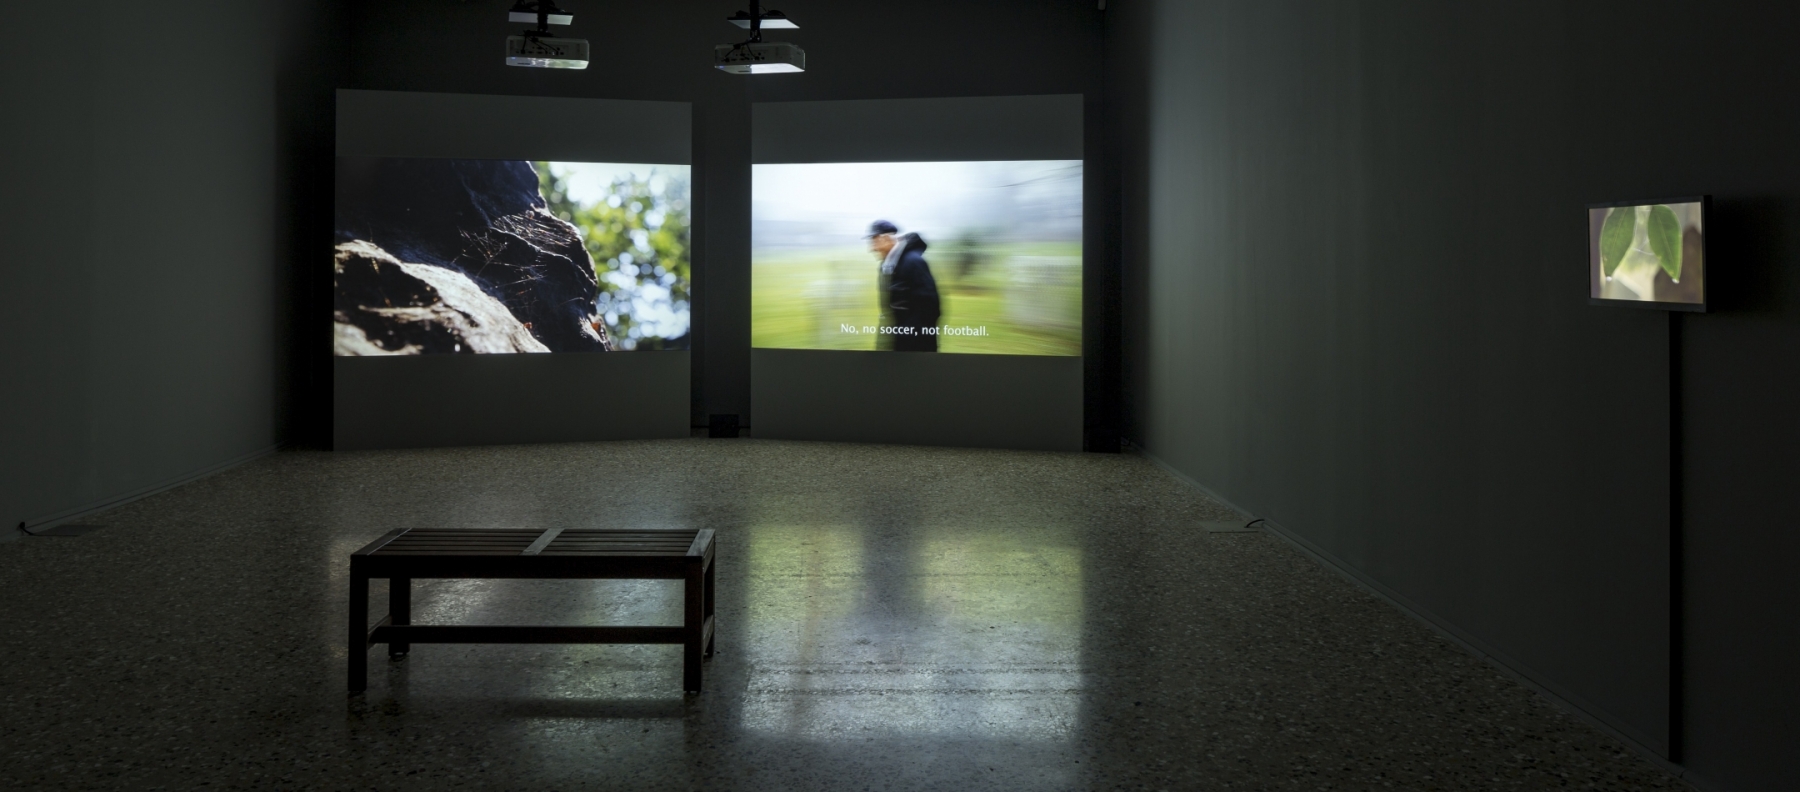 Large Image (installation view 2)